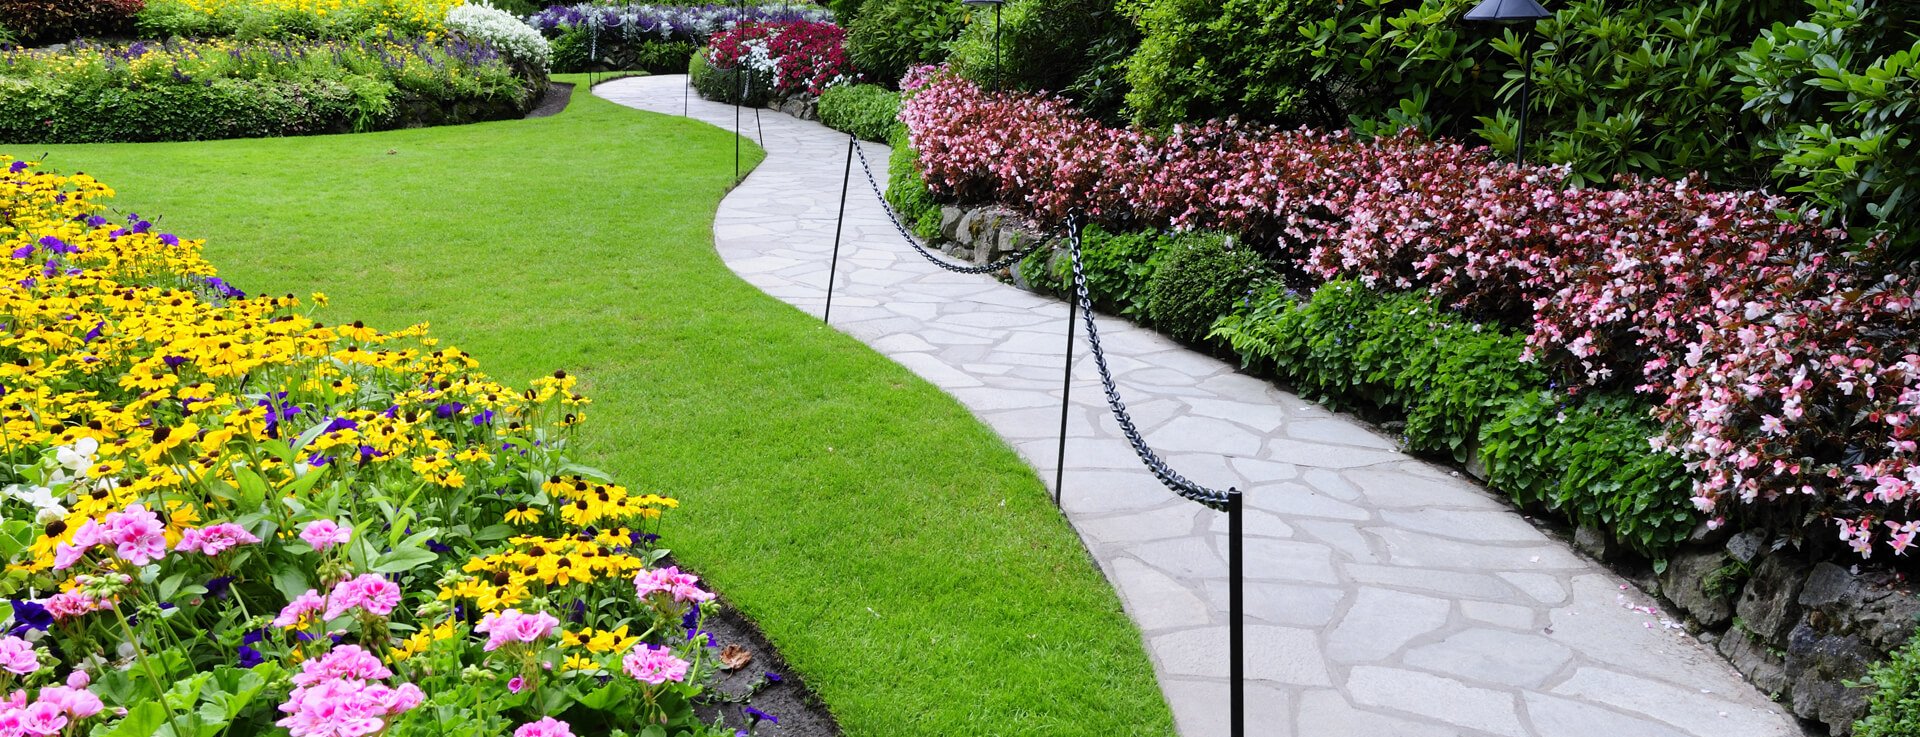 Tim Acton Landscaping, Landscaping Acton Ma